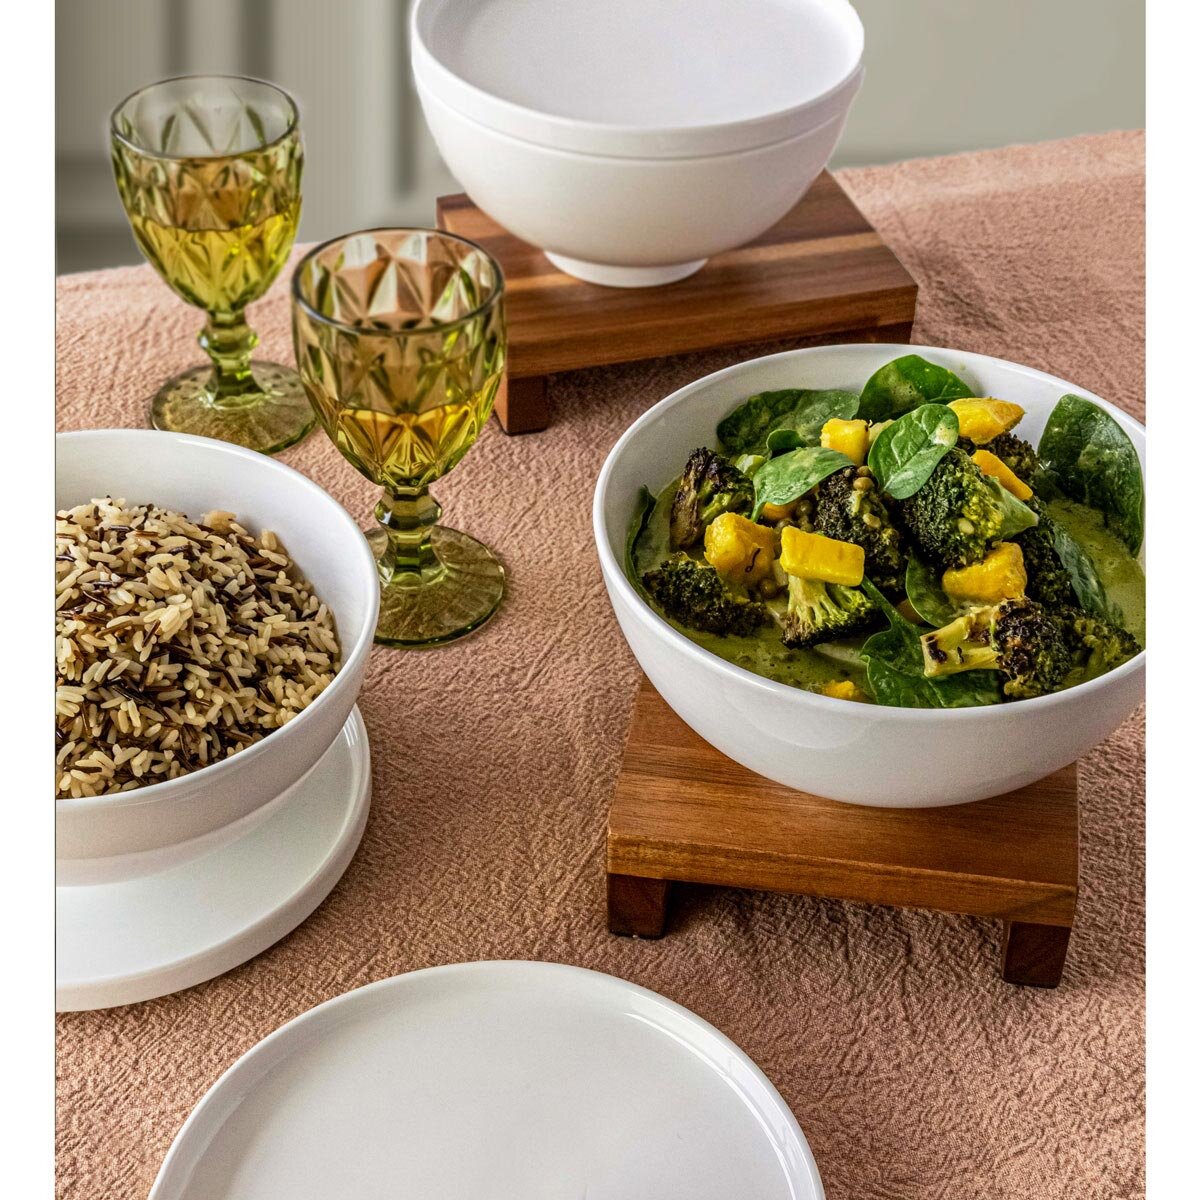 lifestyle image of bowls with plates and lids